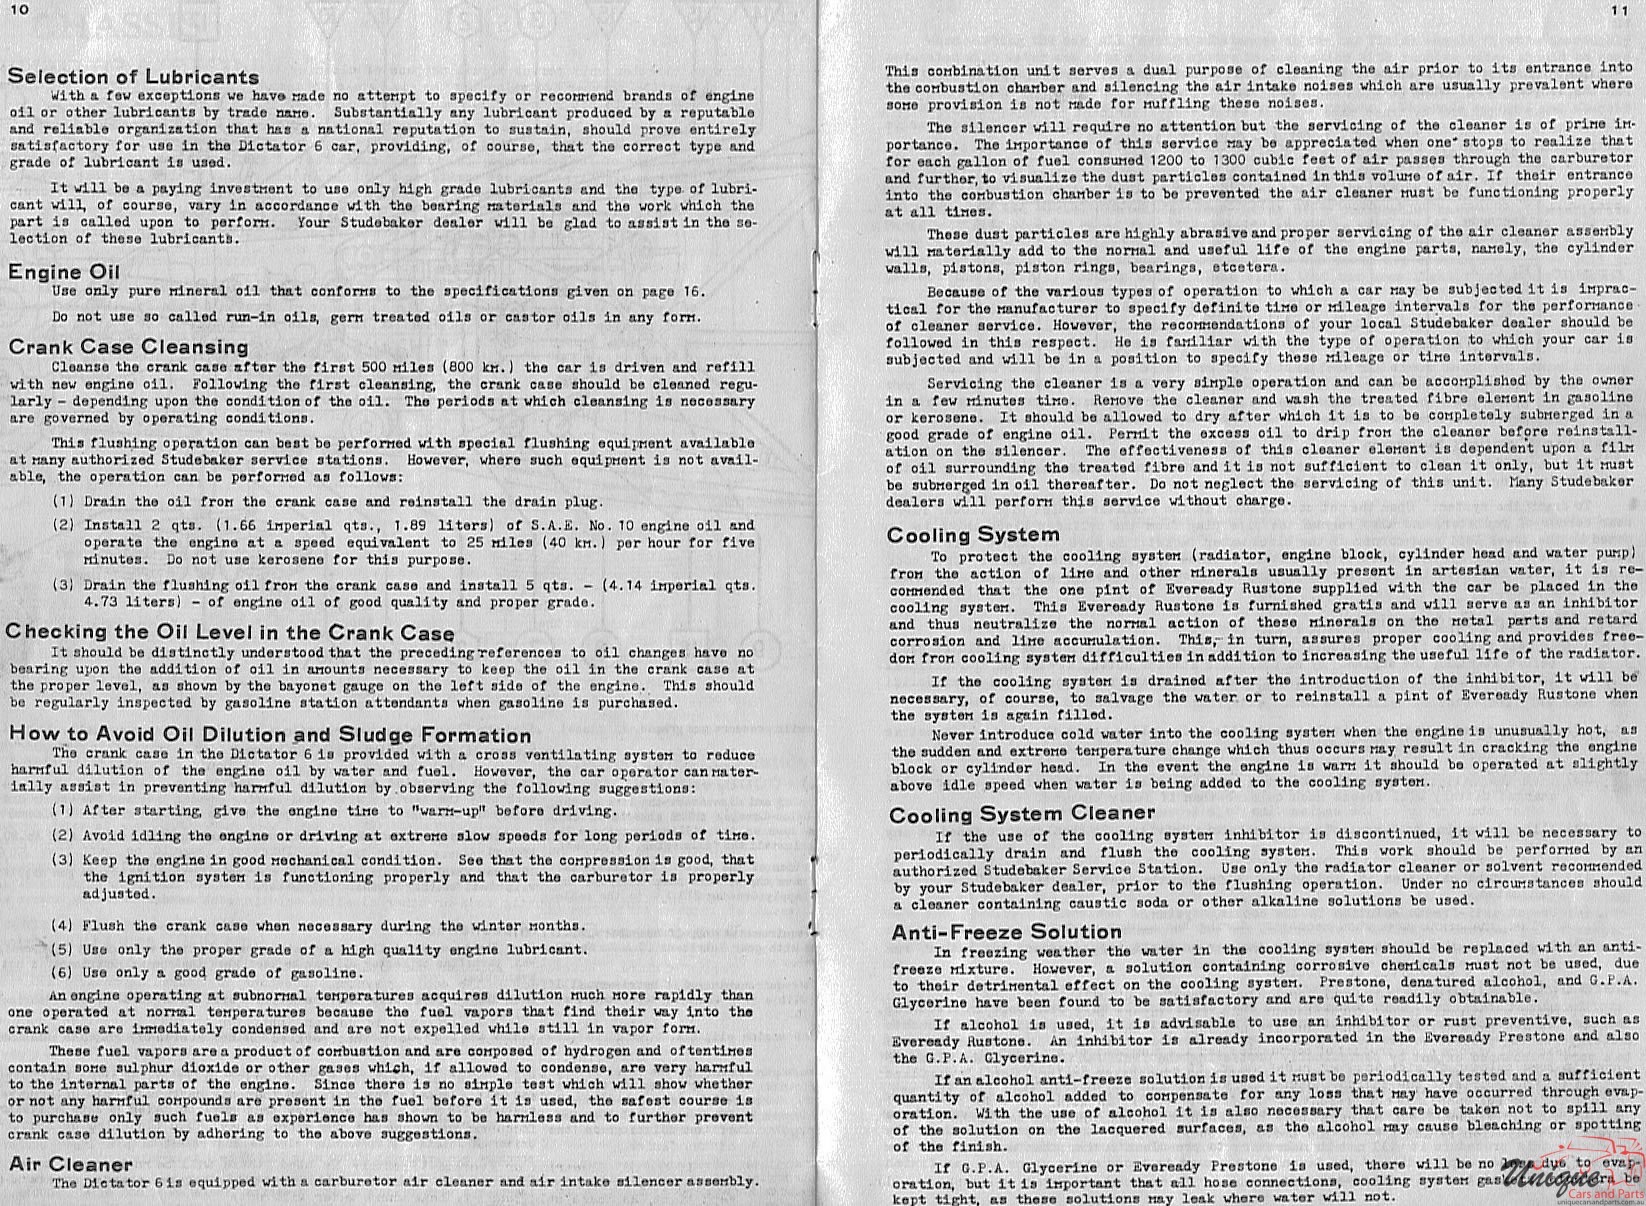 1934 Studebaker Dictator Owners Manual Page 6